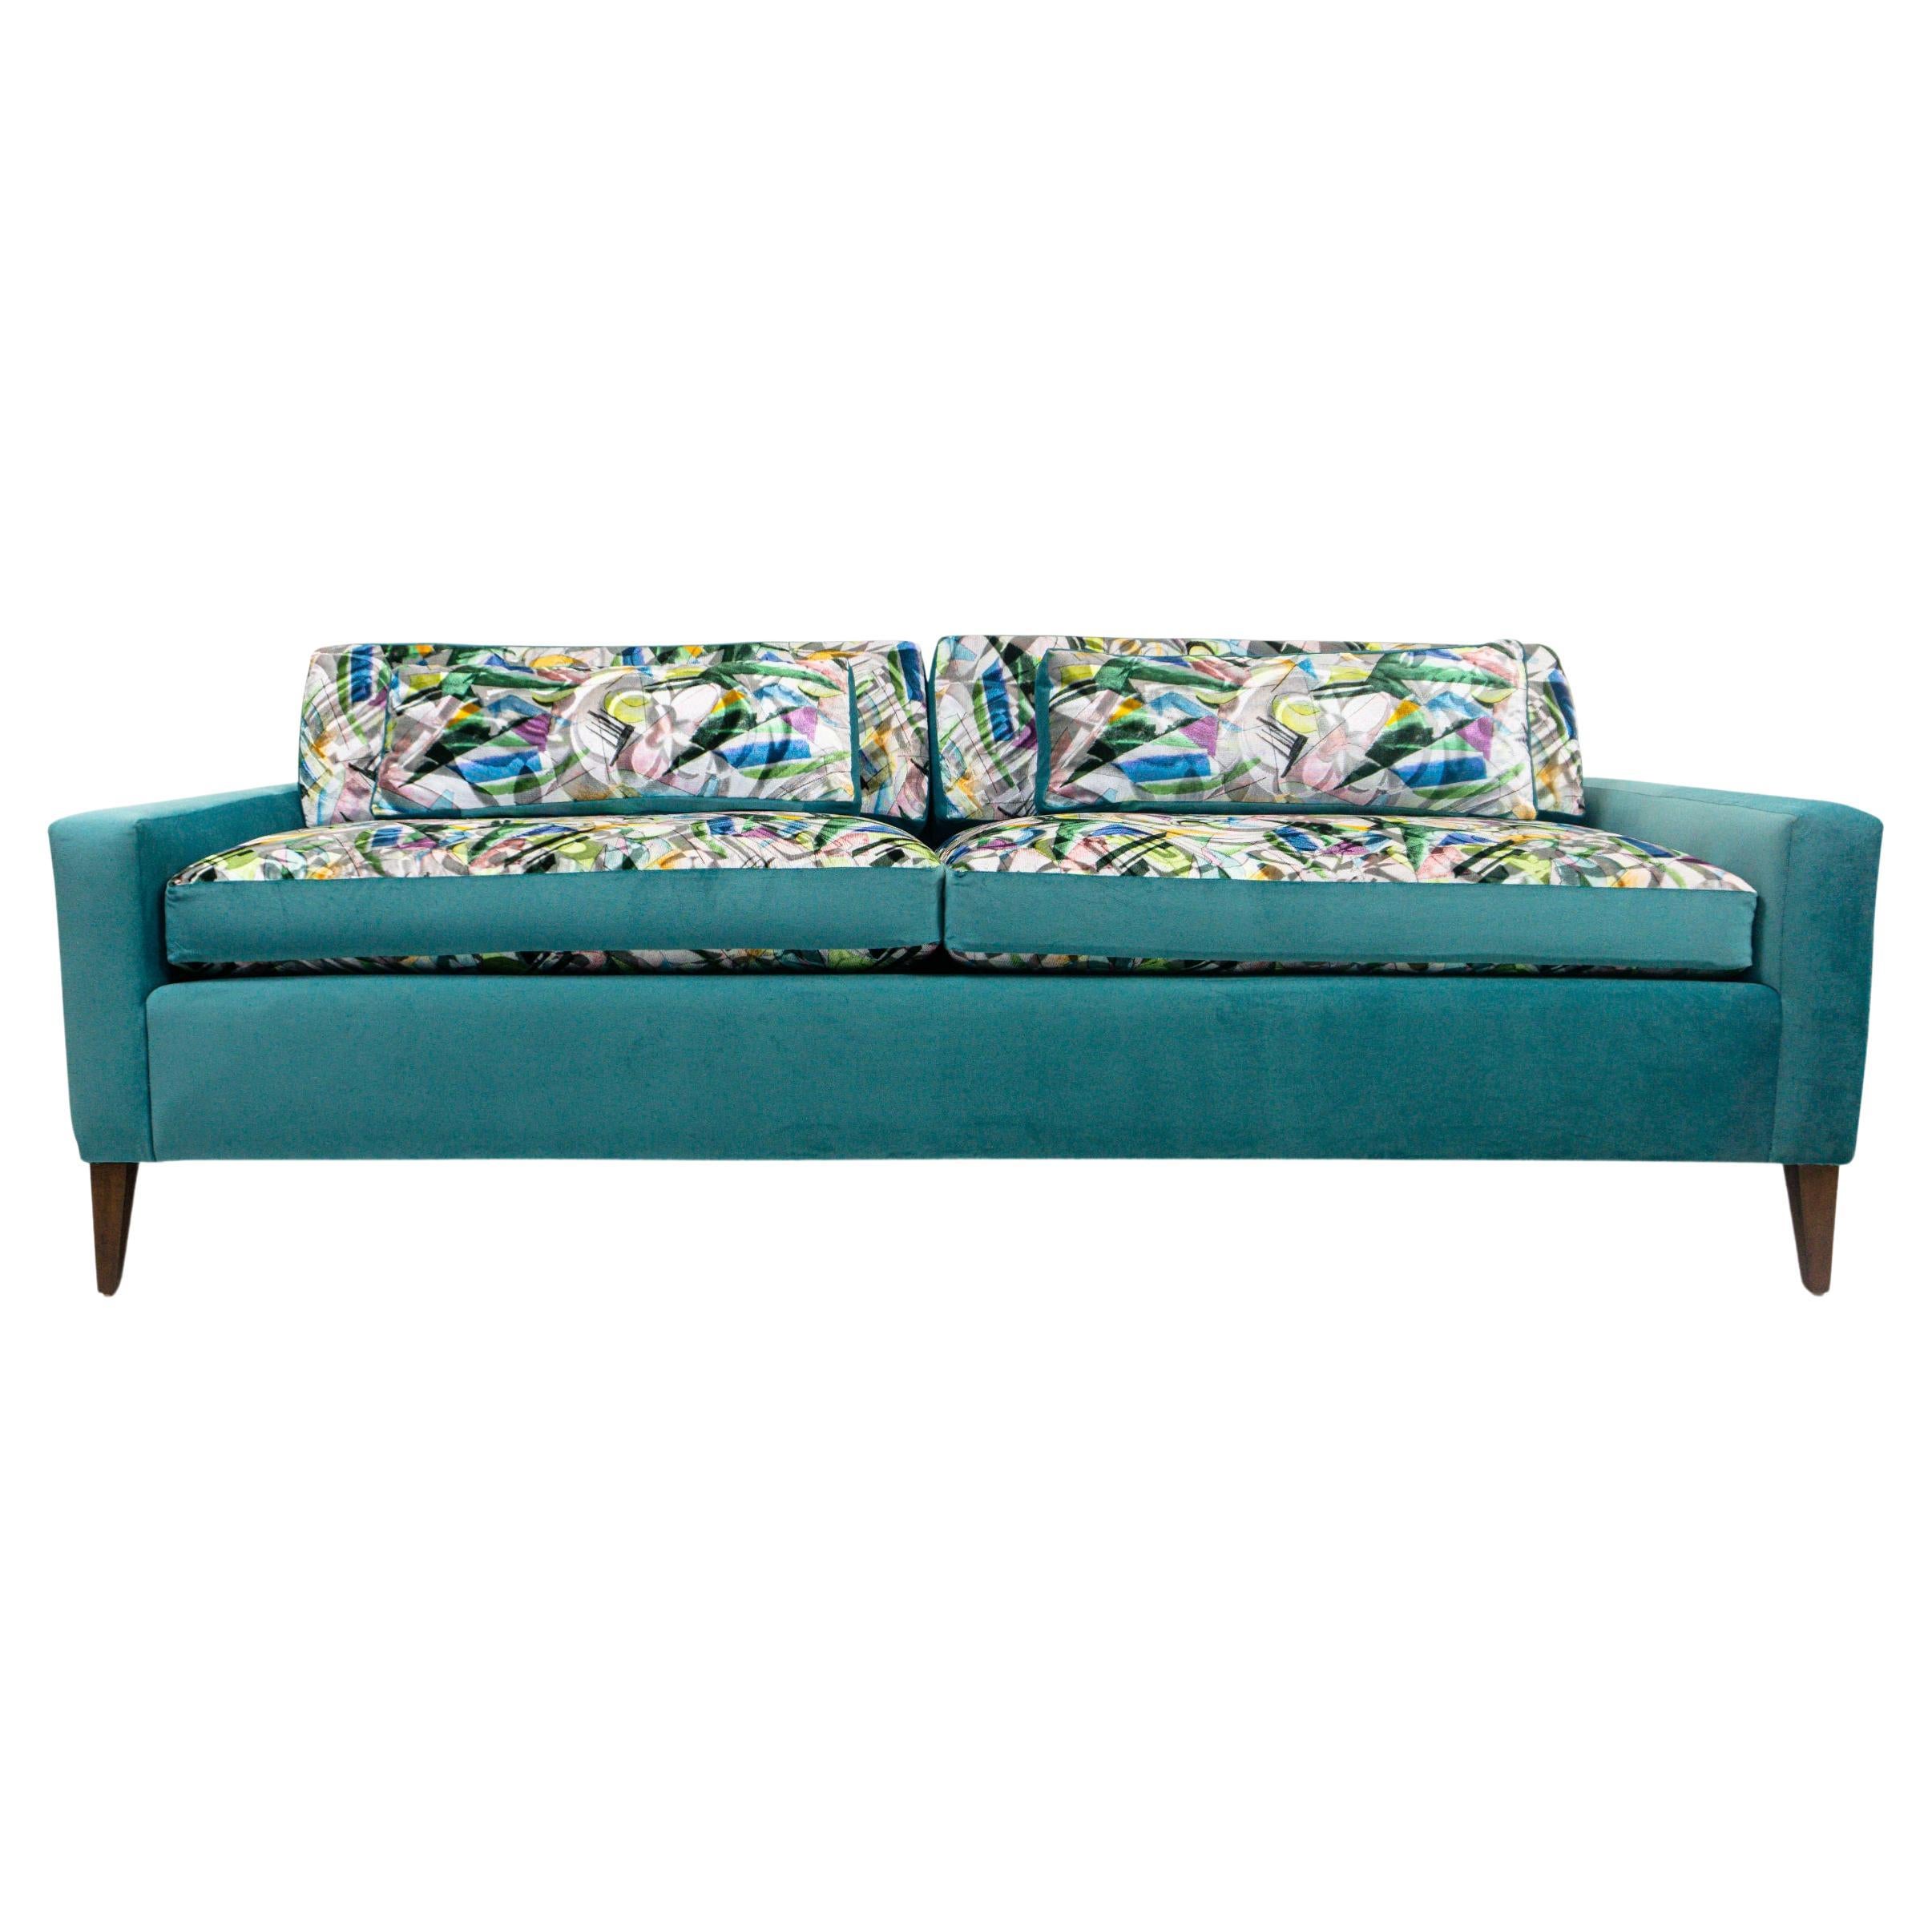 Mid-Century Modern Sofa Upholstered in Turquoise and Abstract Patterned  Velvet For Sale at 1stDibs | modern patterned sofa